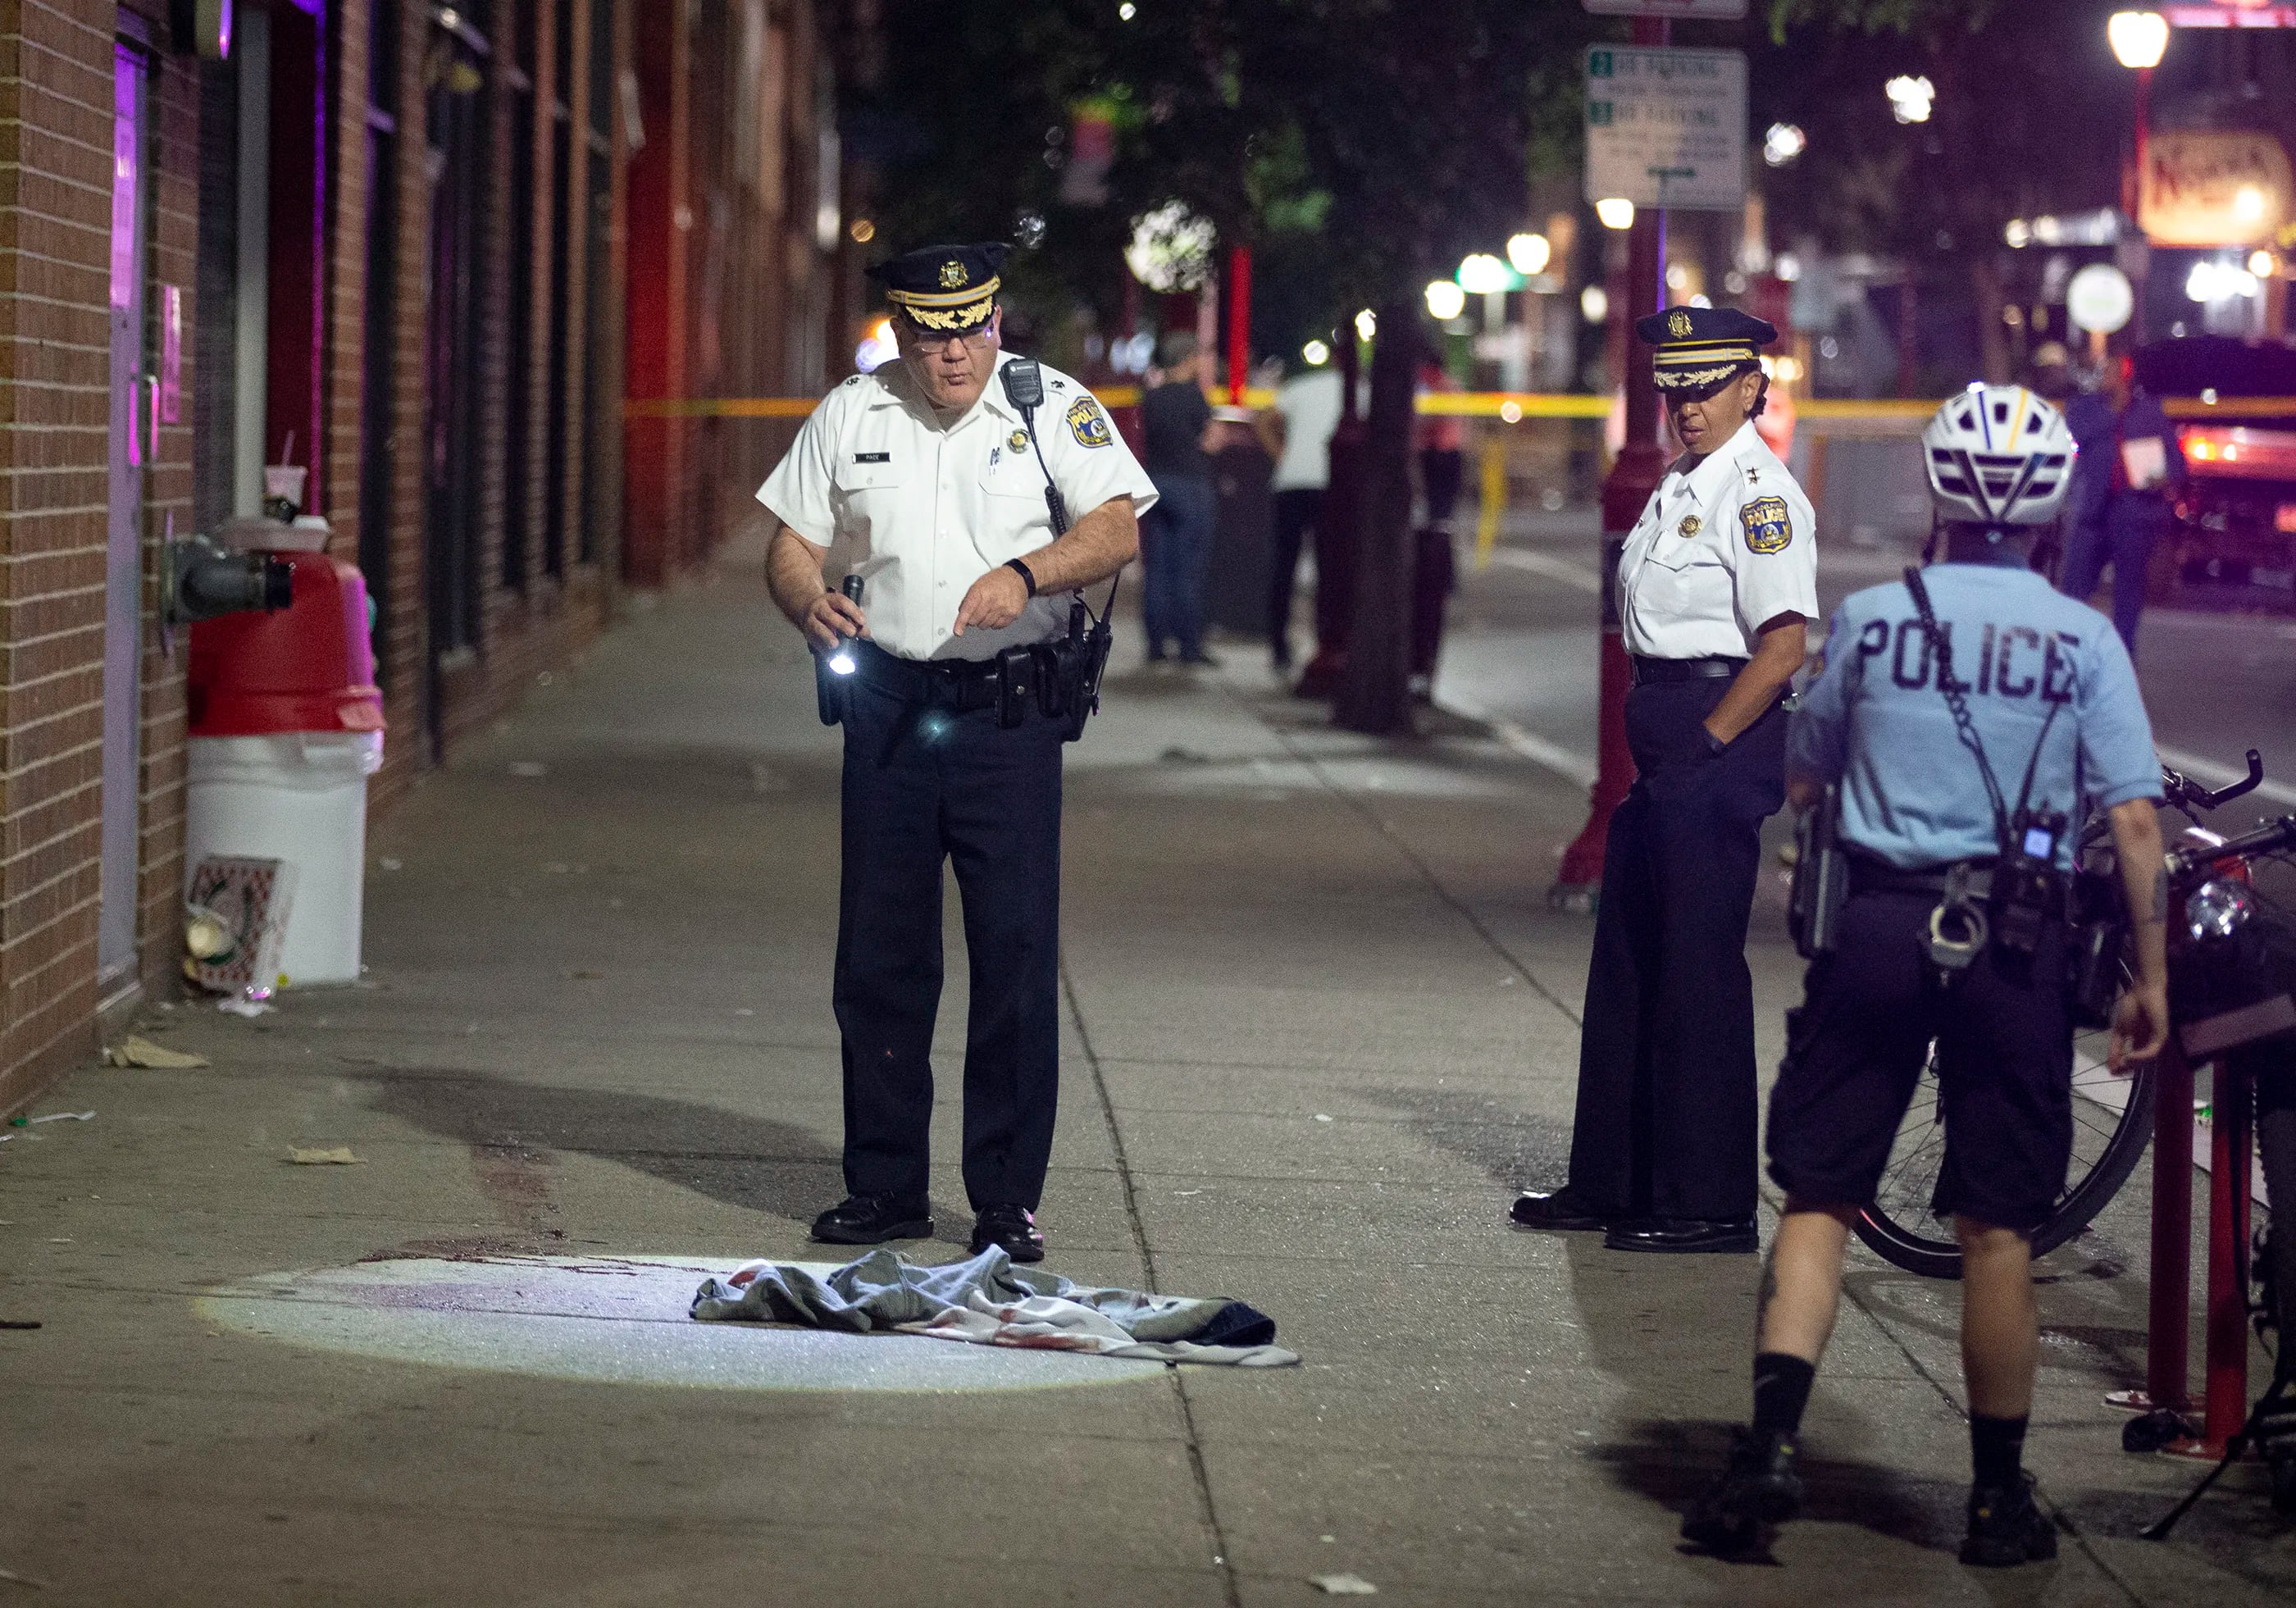 Philadelphia Police D. F. Pace looks over evidence at the scene of a shooting on and near South Street that left 3 dead and 11 wounded.